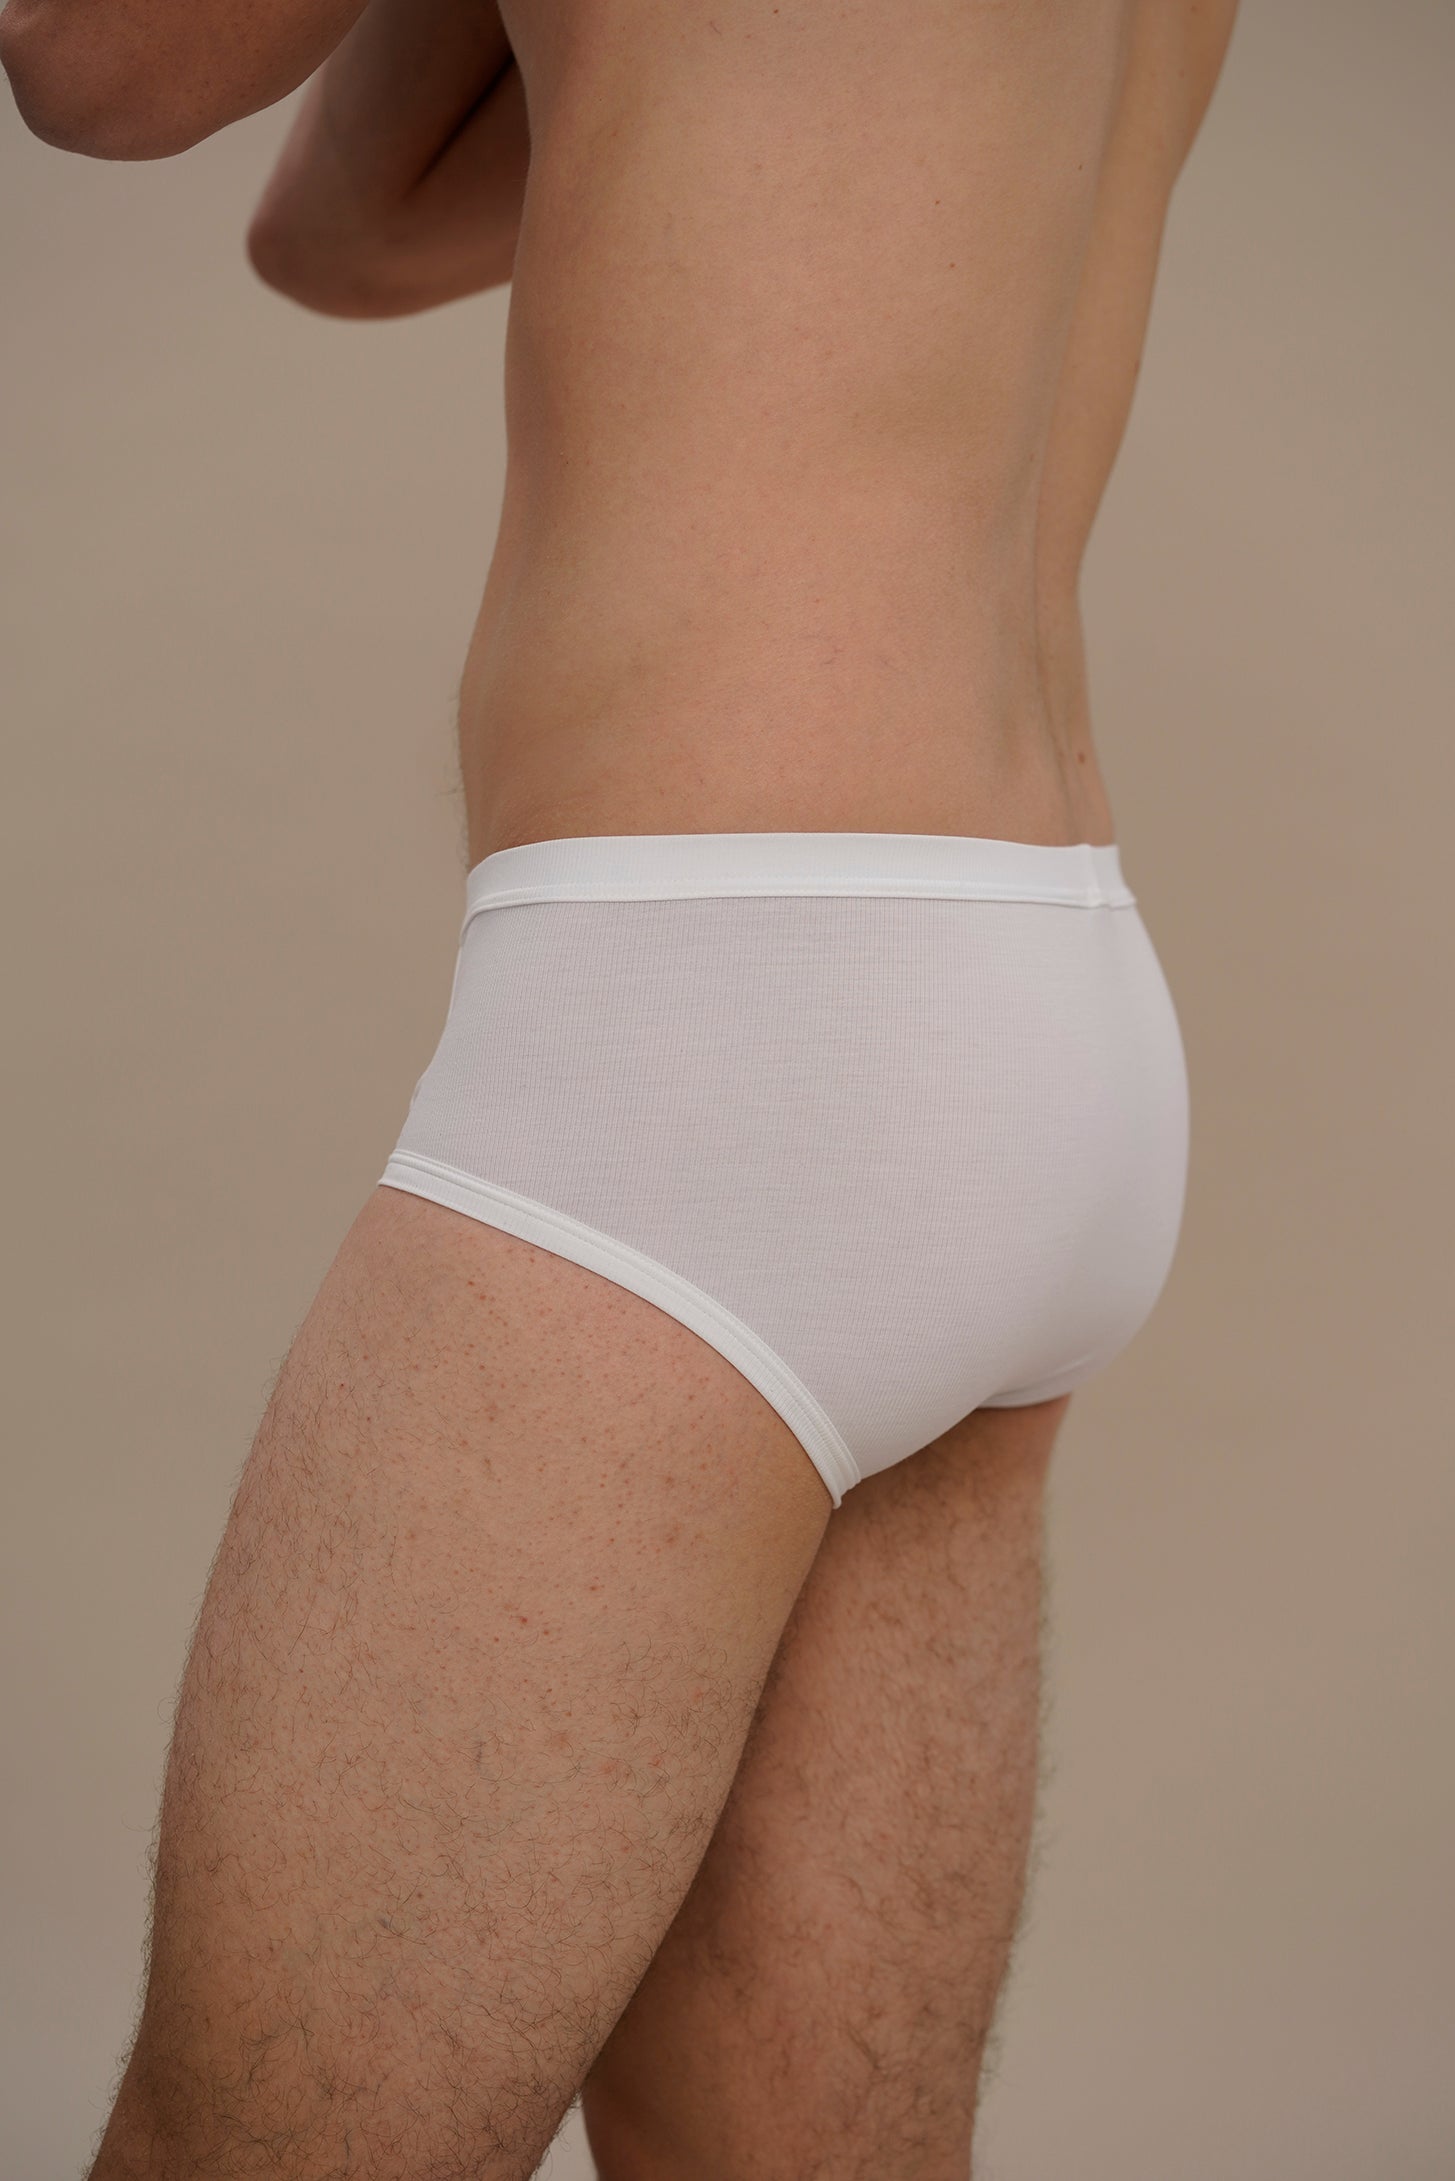 Underpants / briefs in white made of natural MicroModal from moi-basics